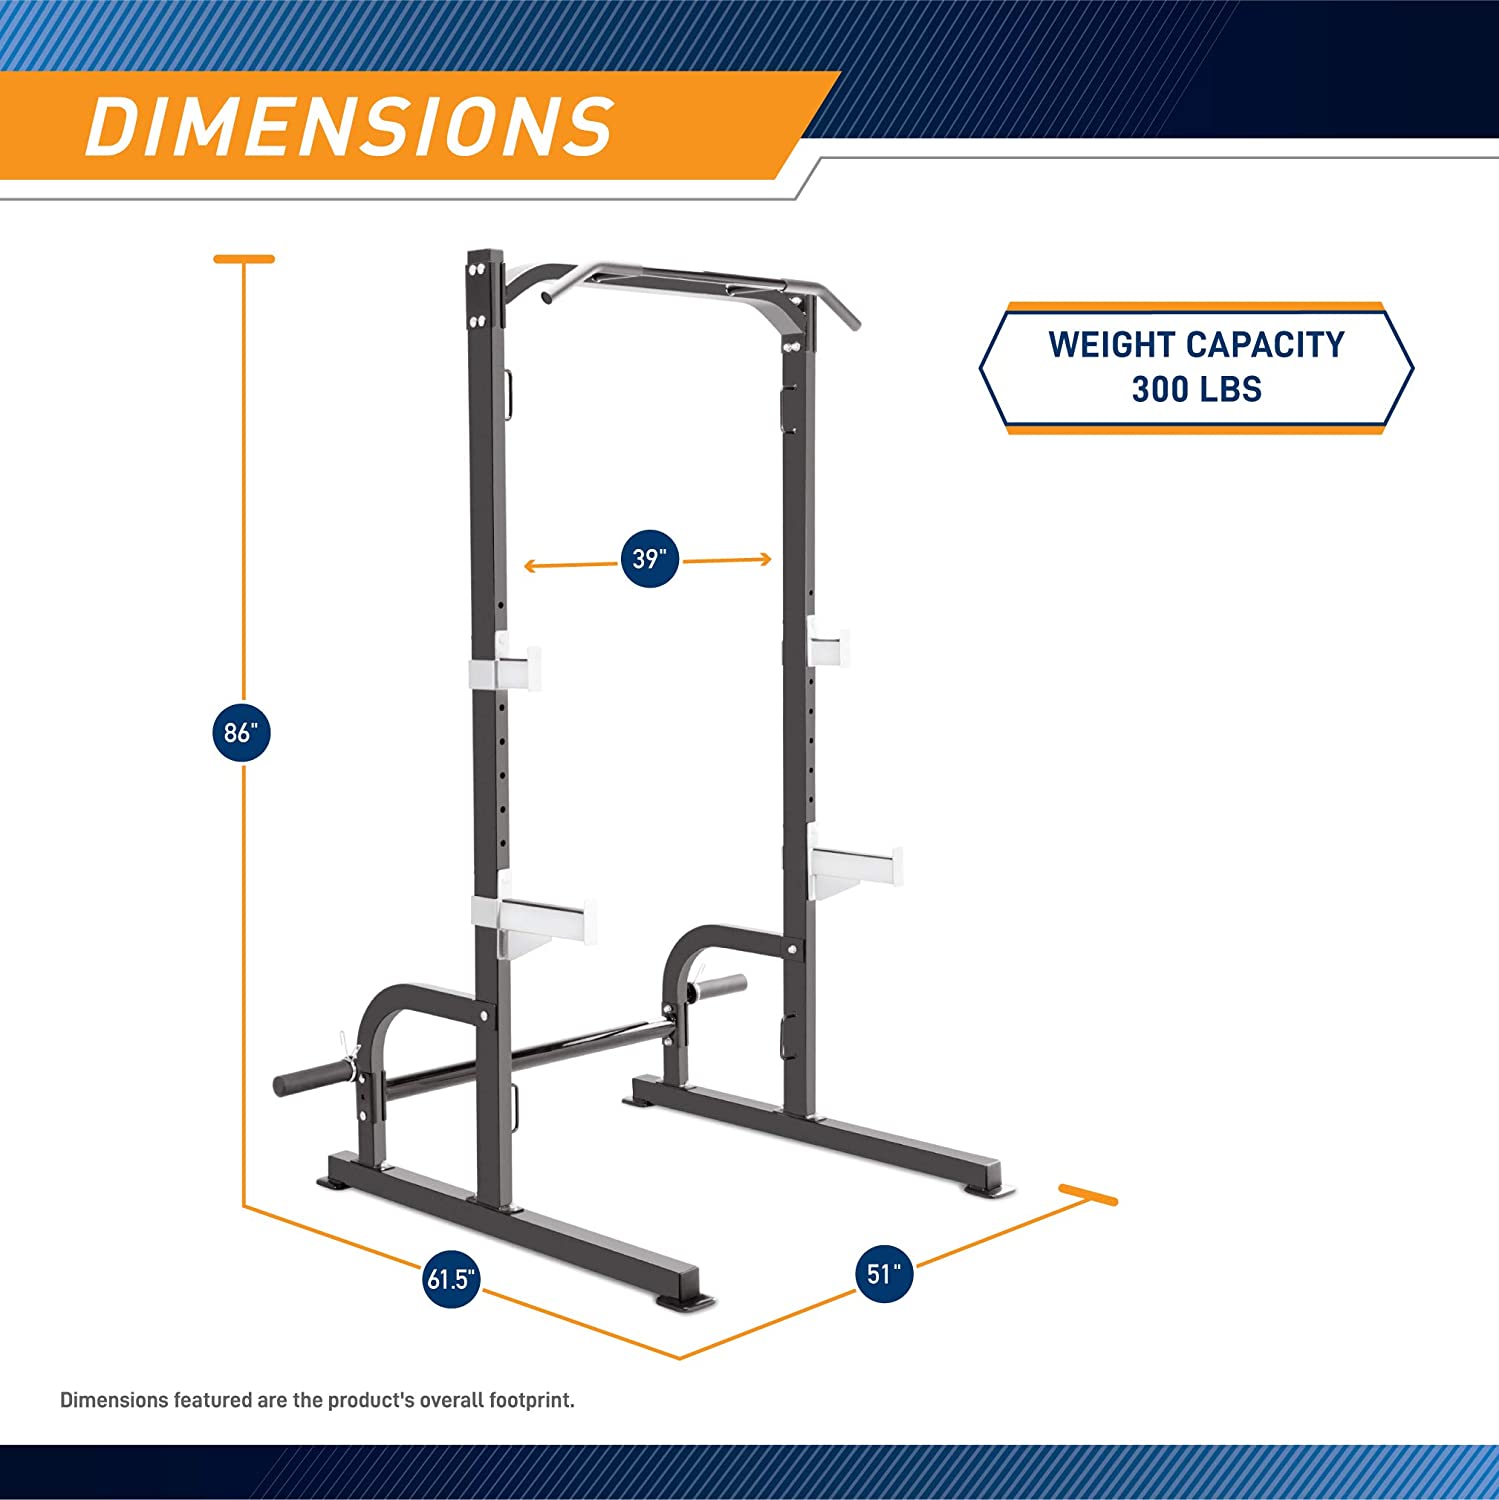 Marcy Squat Rack With Multi-Grip Pull Up Bar | SB-670